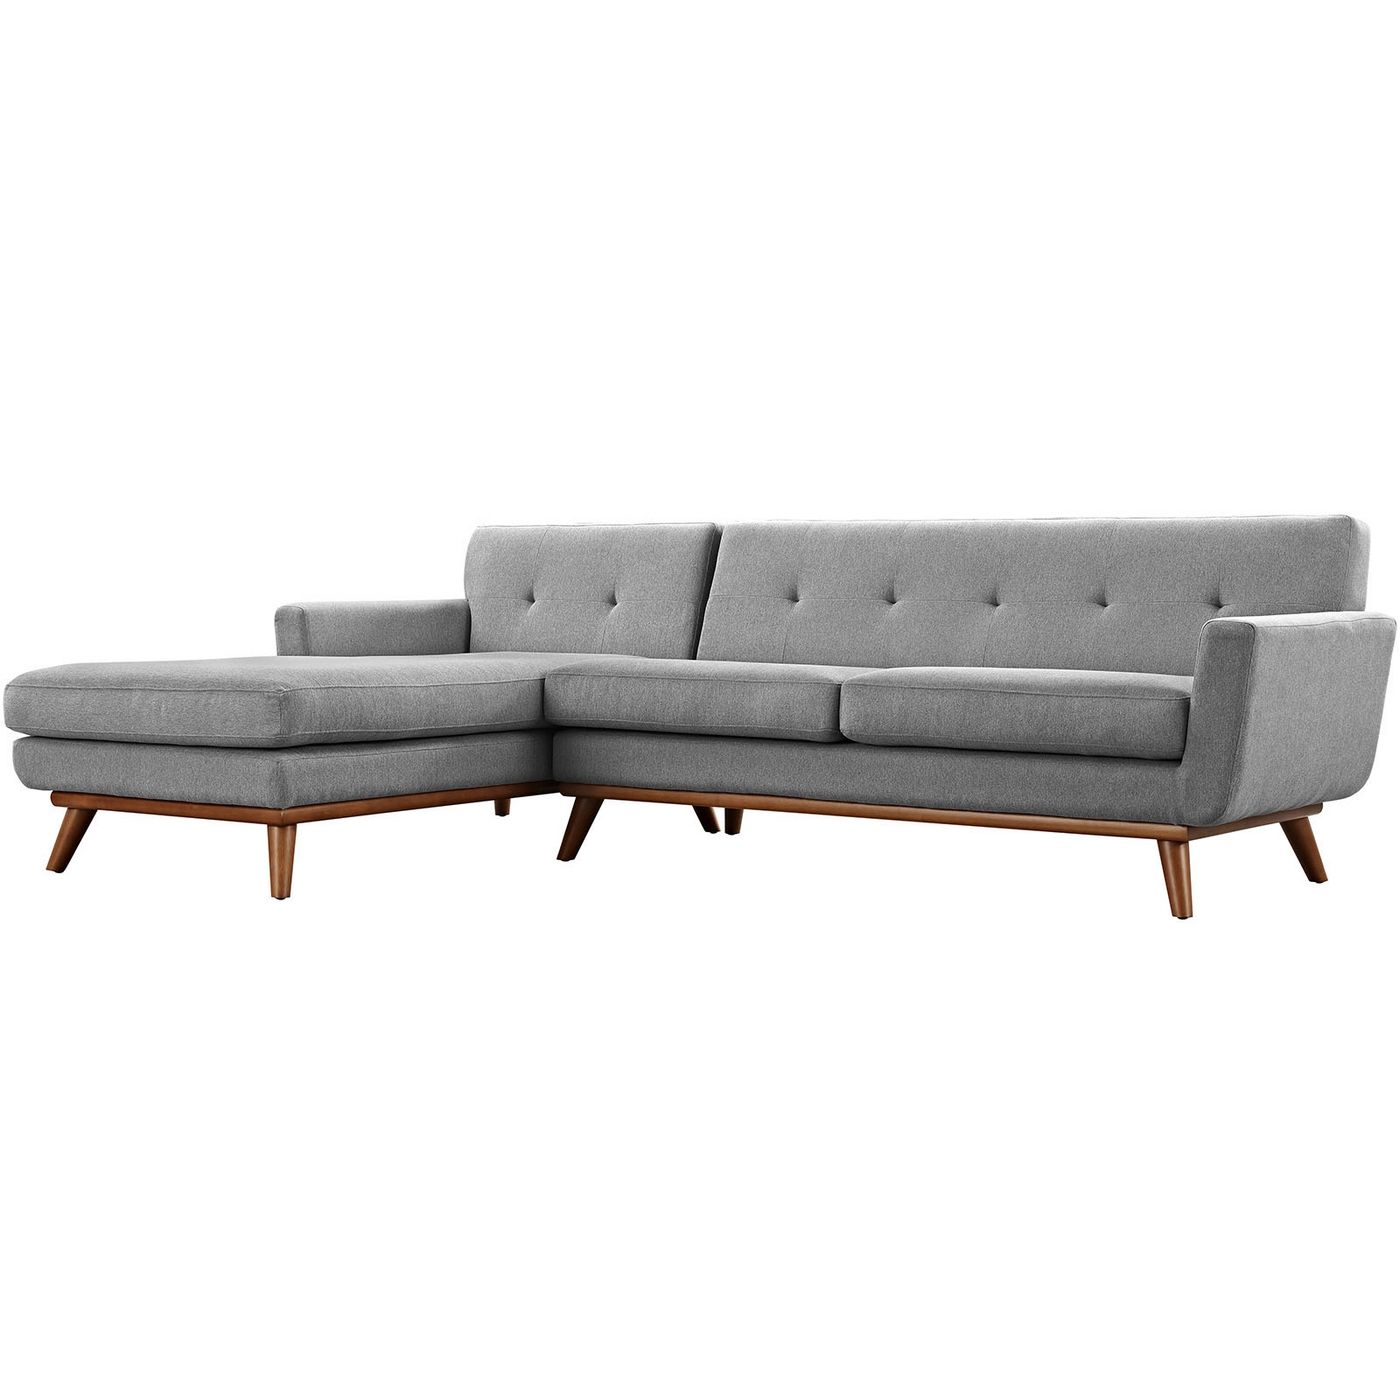 Popular Mid Century Modern Engage Right Facing Chaise Sectional Throughout Alani Mid Century Modern Sectional Sofas With Chaise (Gallery 19 of 20)